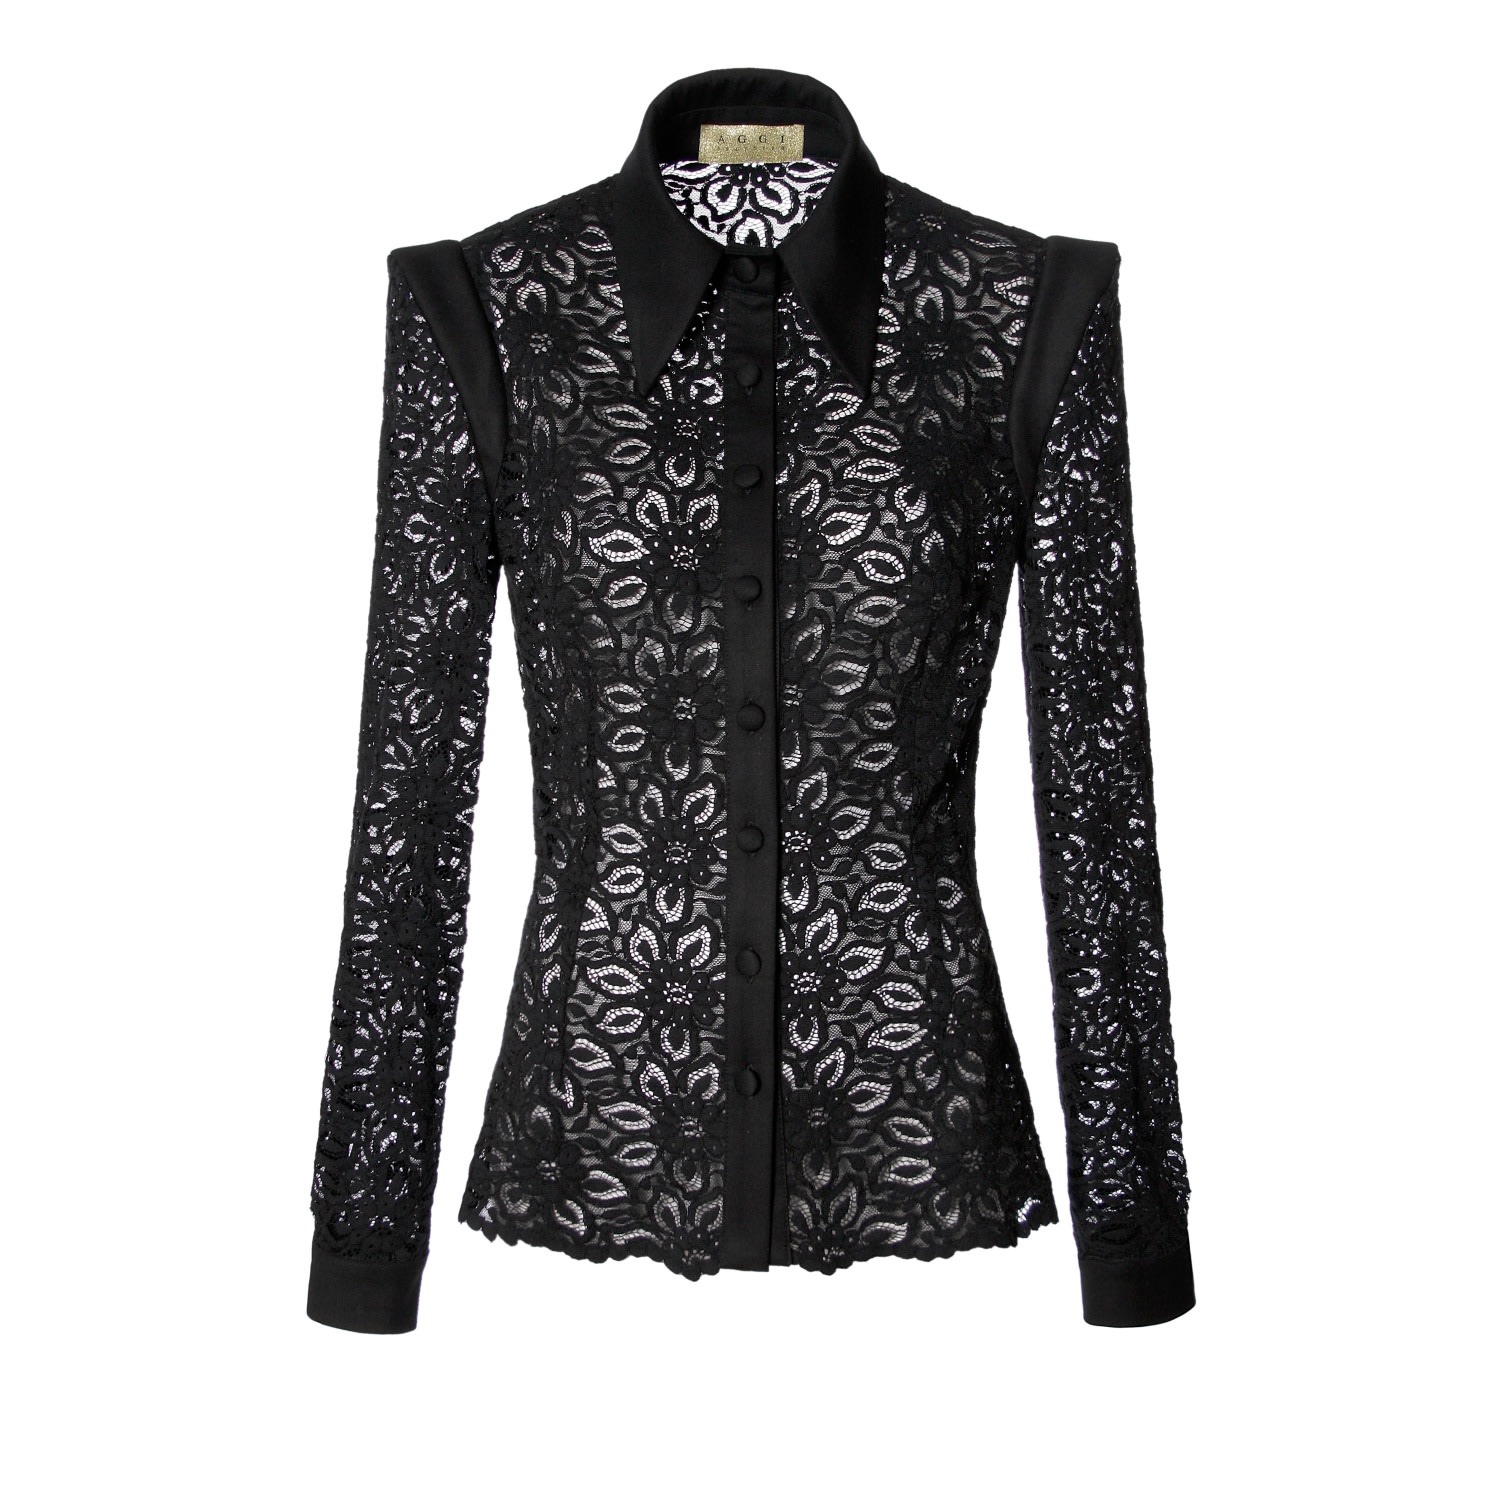 Women’s Patty Reach Black Floral Lace Shirt Extra Small Aggi